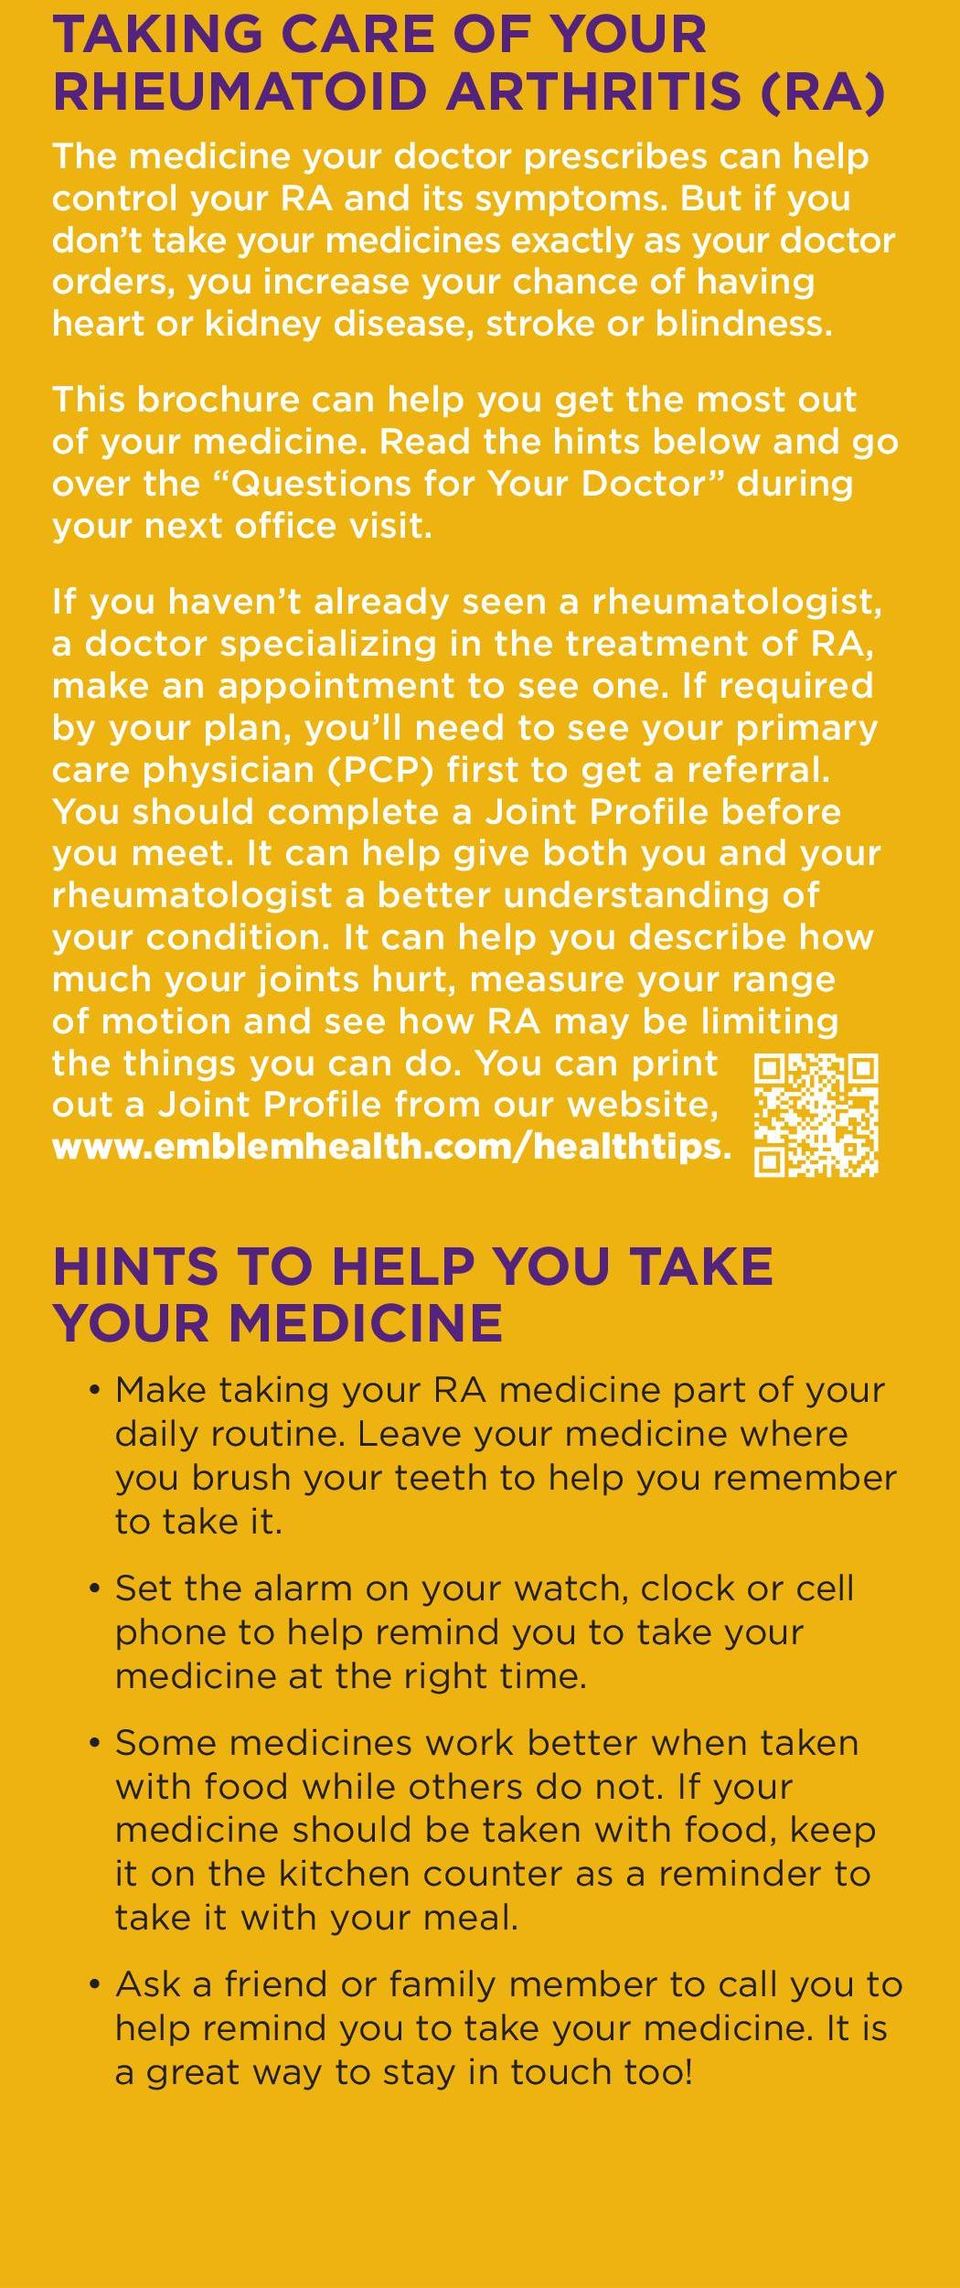 This brochure can help you get the most out of your medicine. Read the hints below and go over the Questions for Your Doctor during your next office visit.